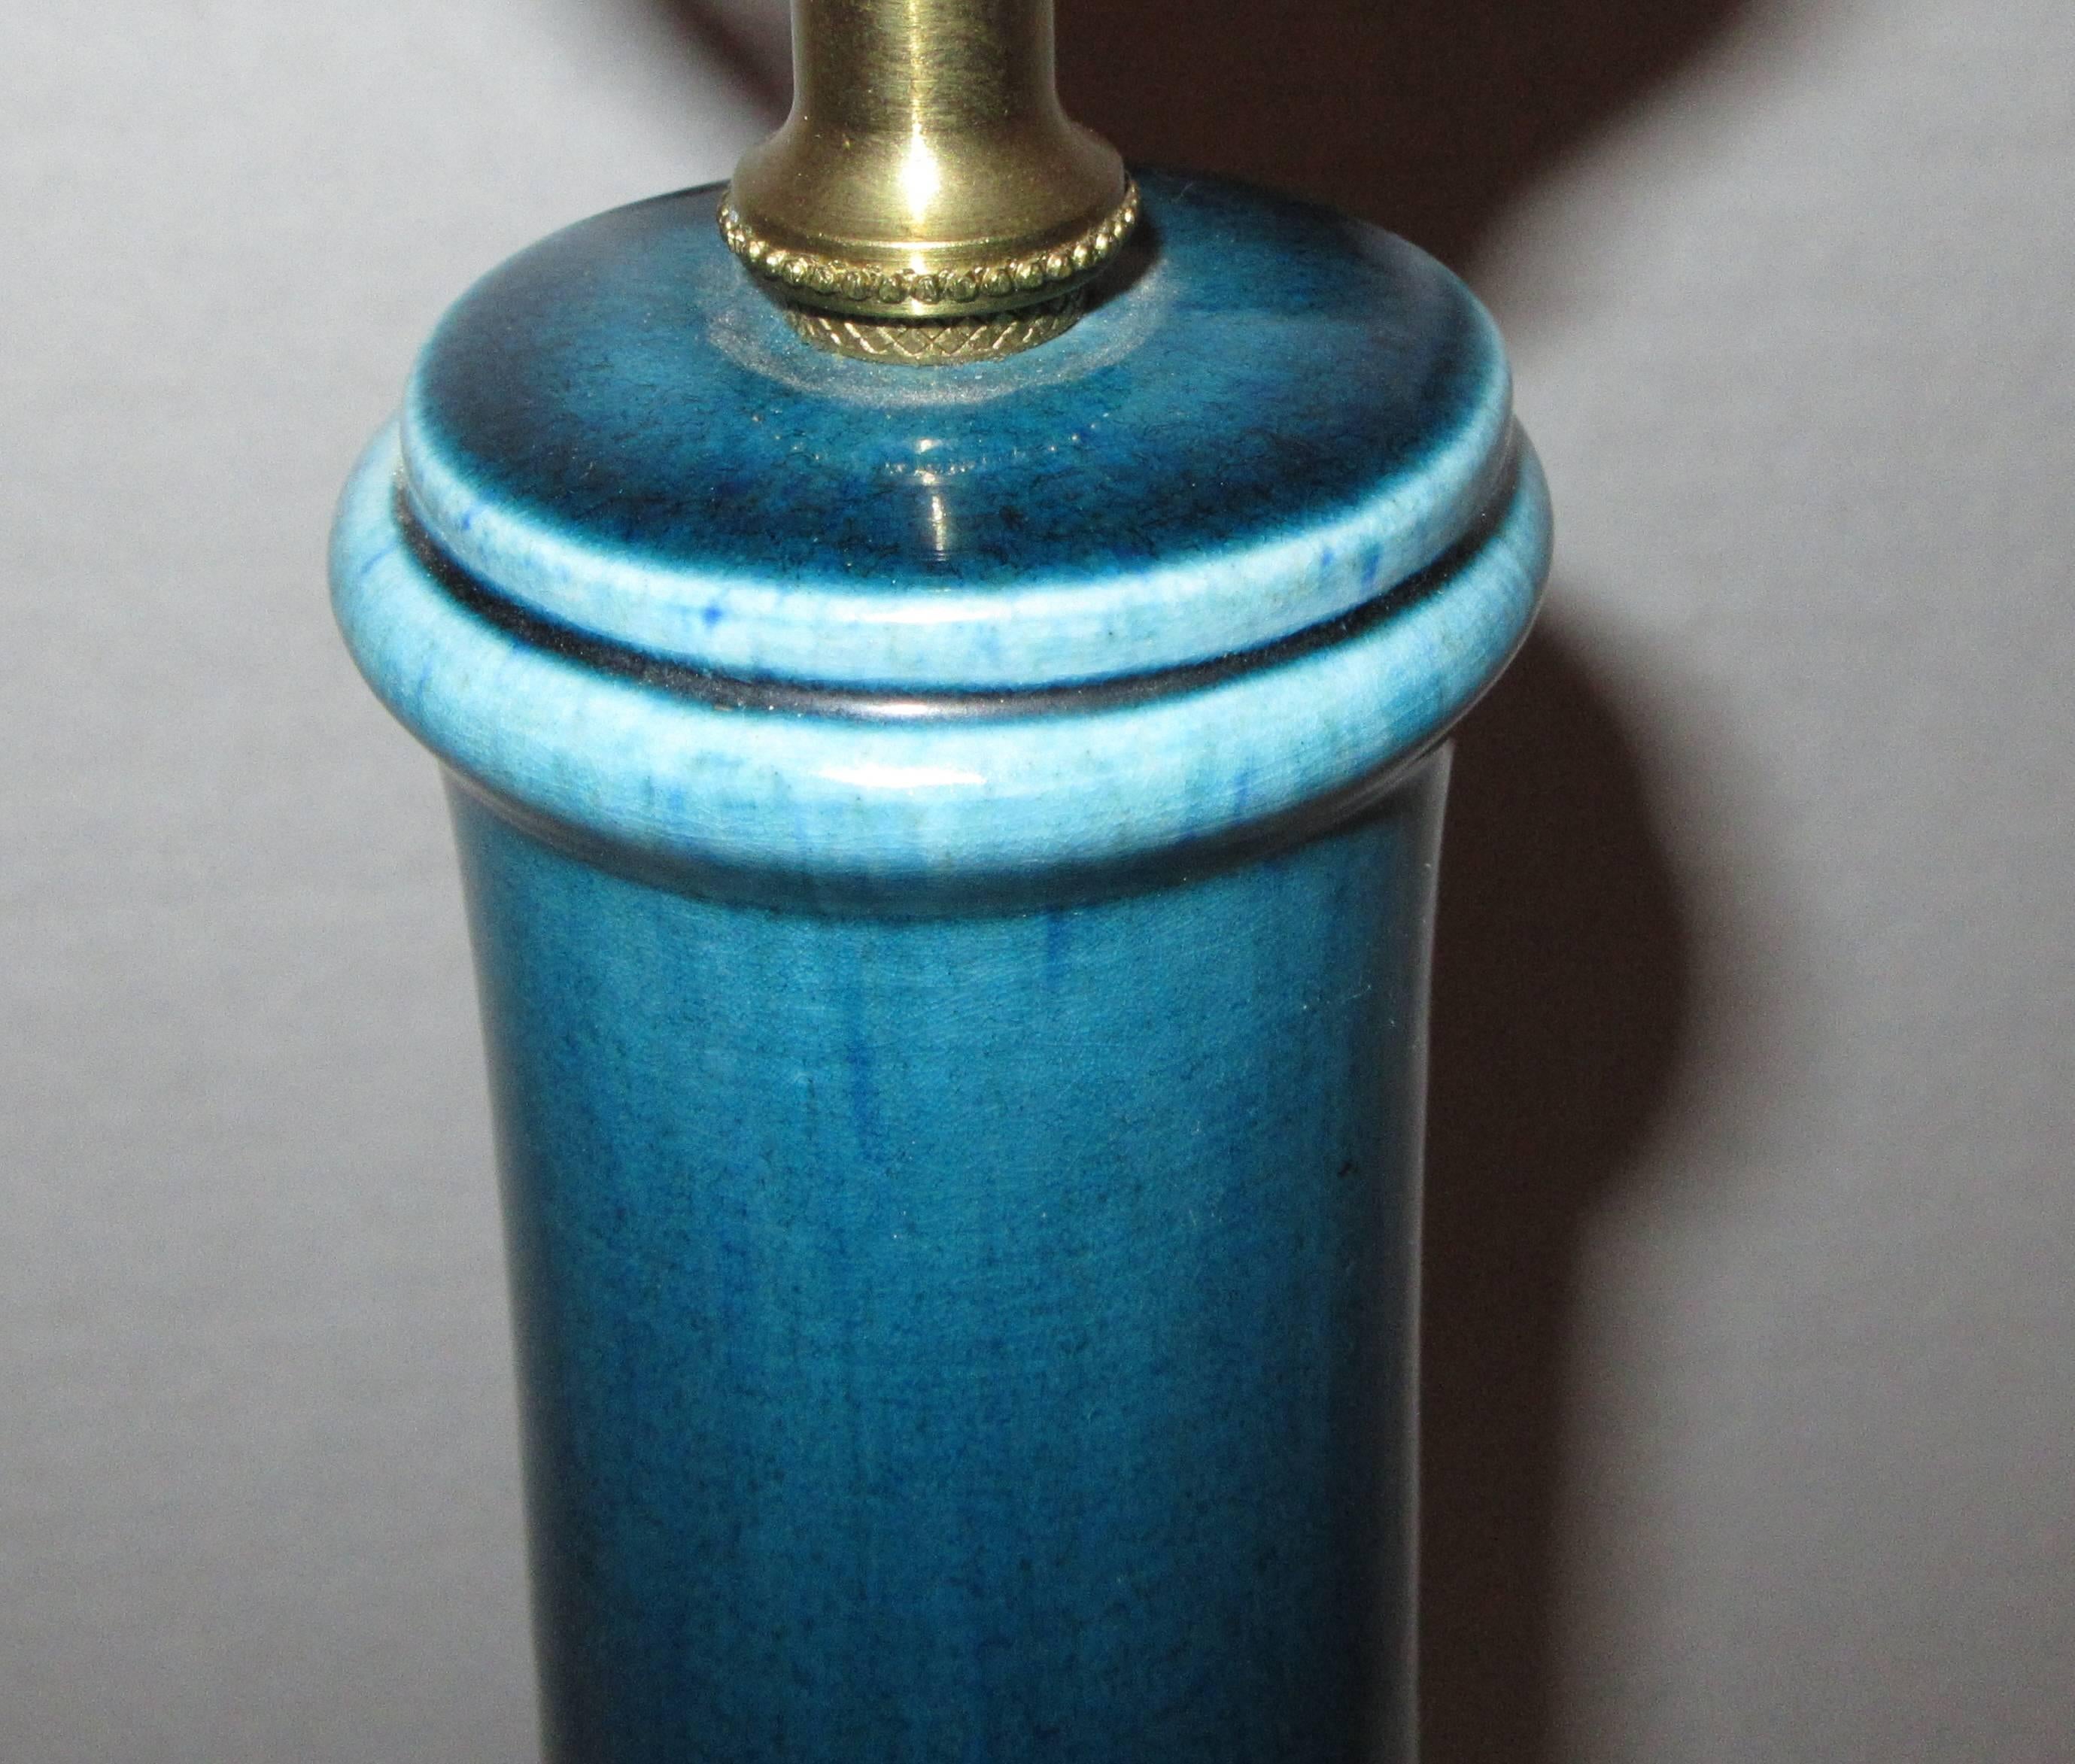 A bottle form ceramic table lamp glazed in a rich blue.